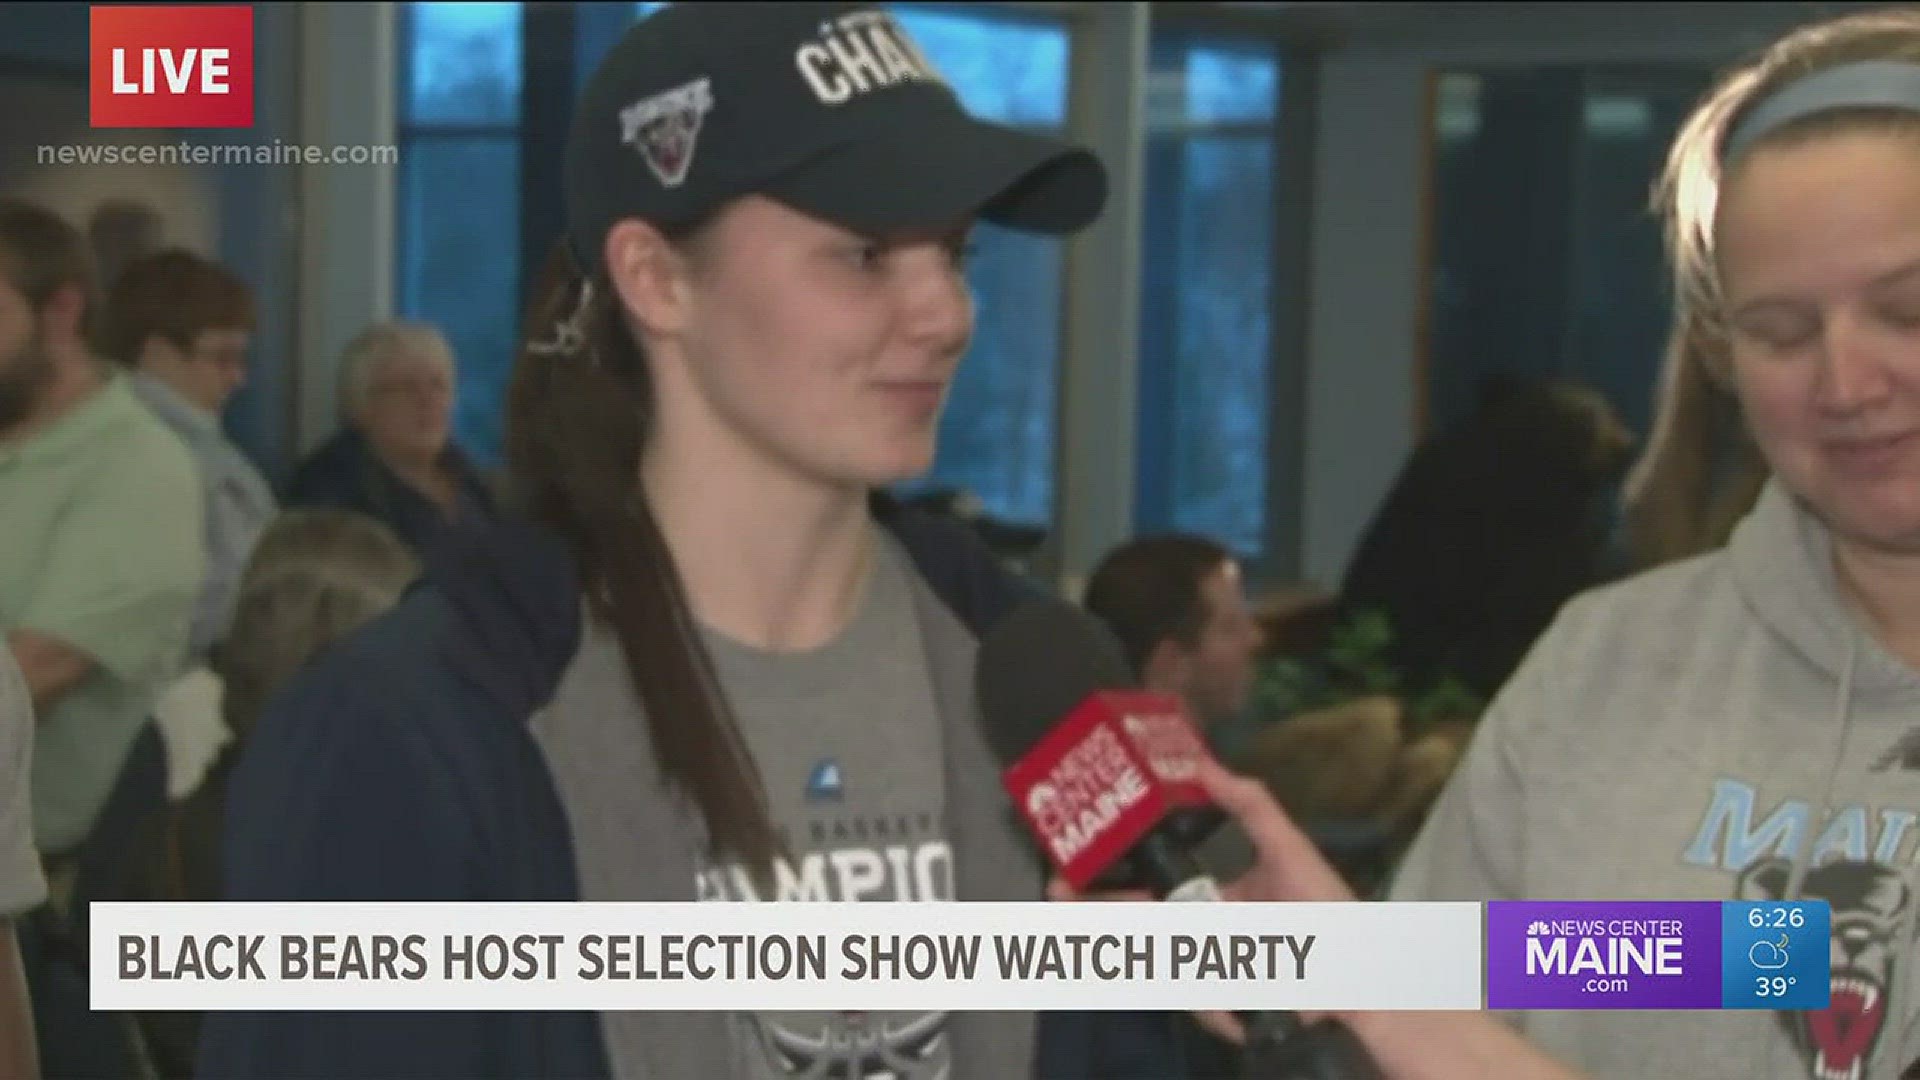 Black Bears host selection show watch party